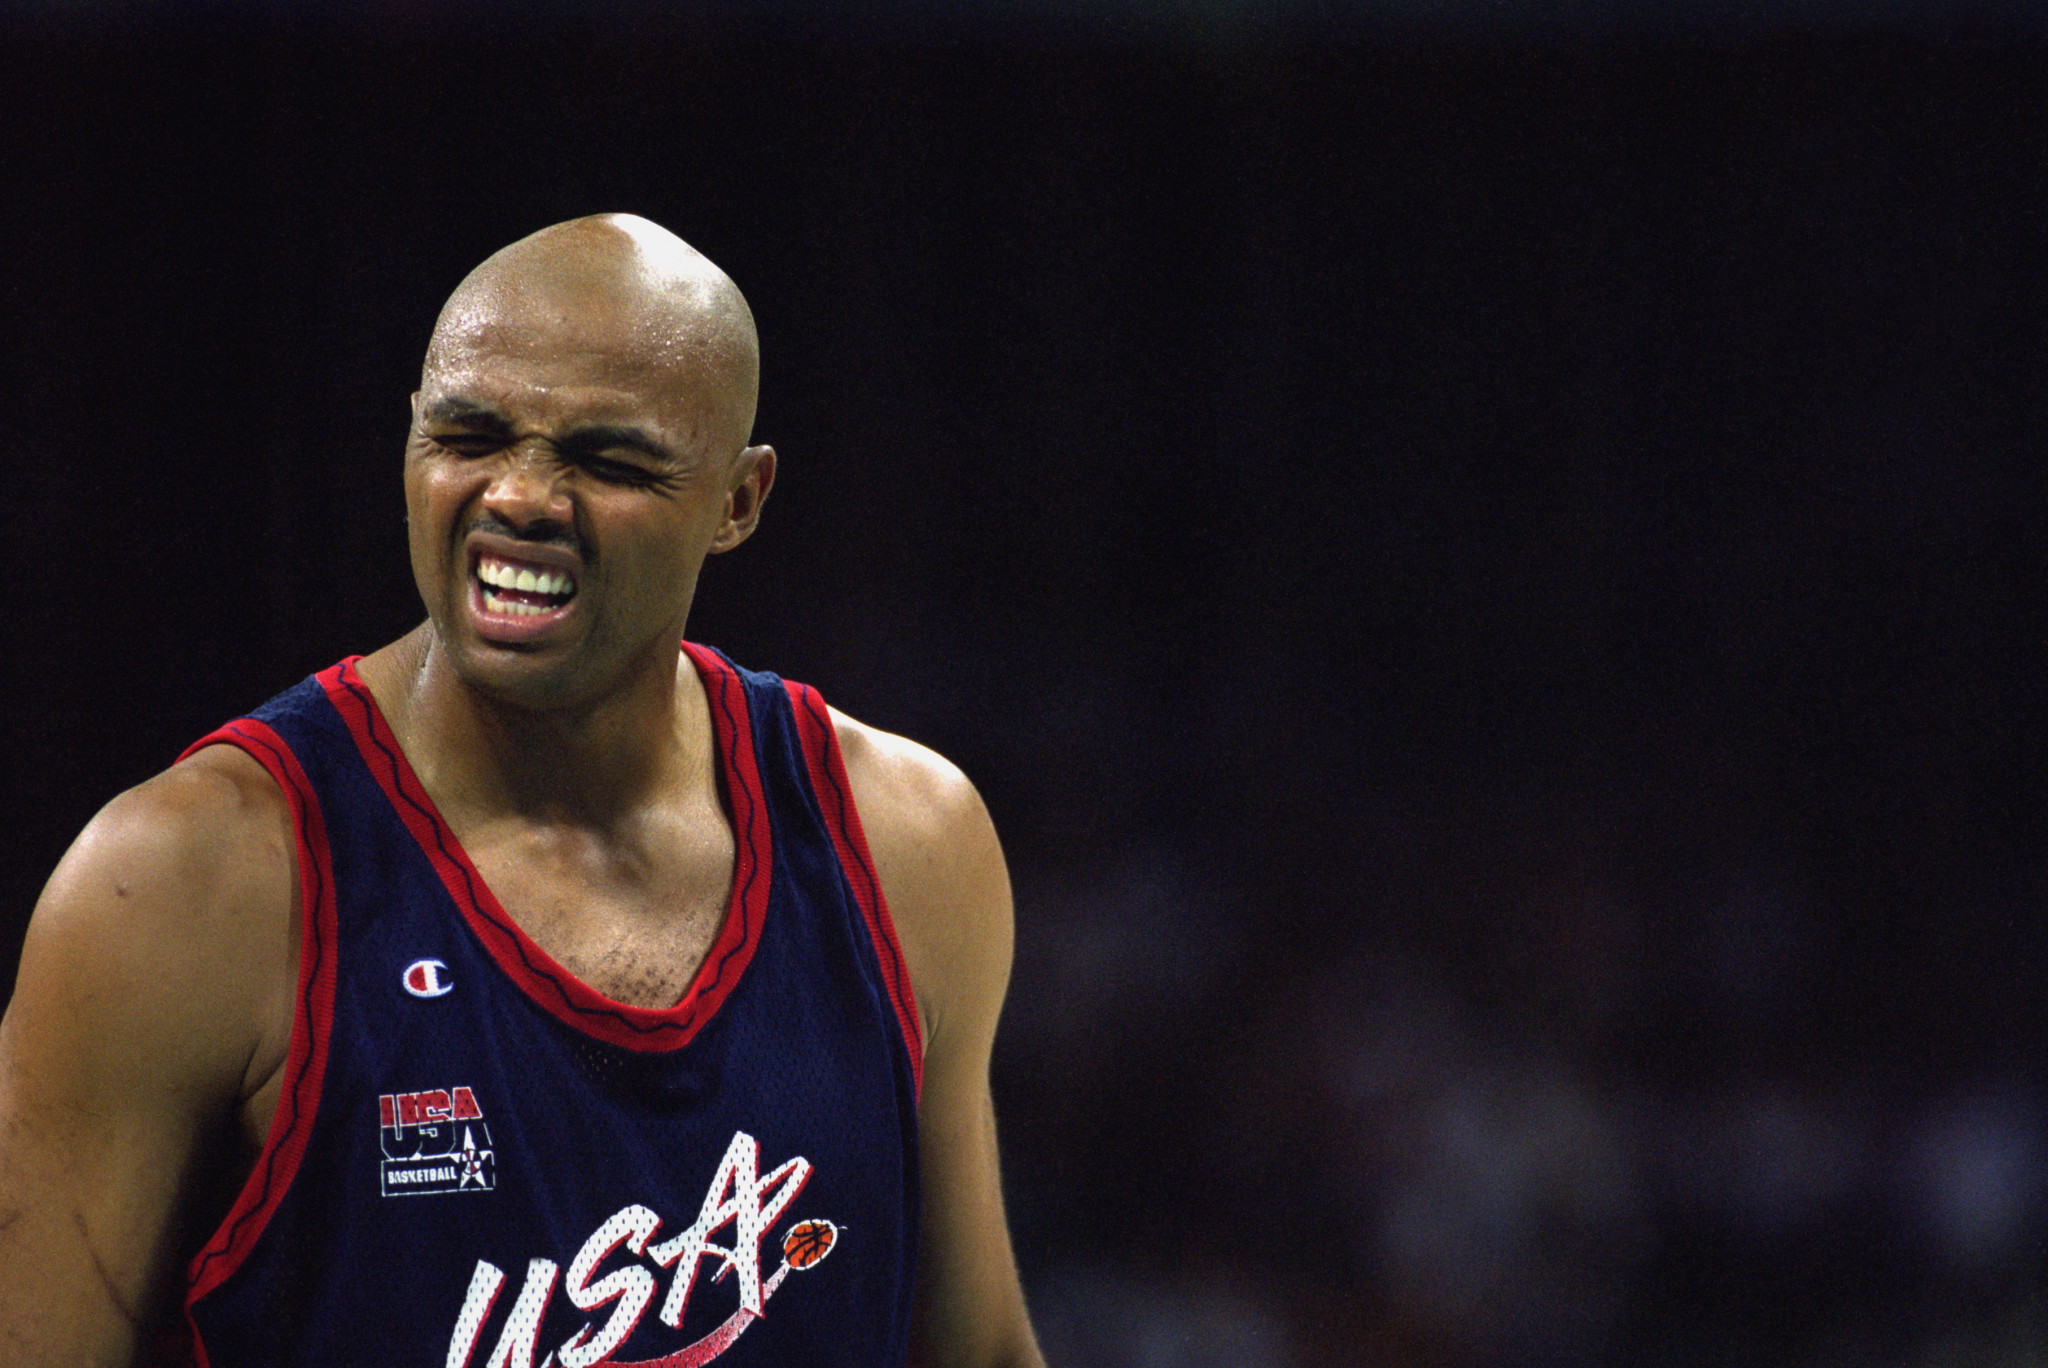 Charles Barkley earned Olympic gold at the Barcelona 1992 and Atlanta 1996 Olympic Games ©Getty Images